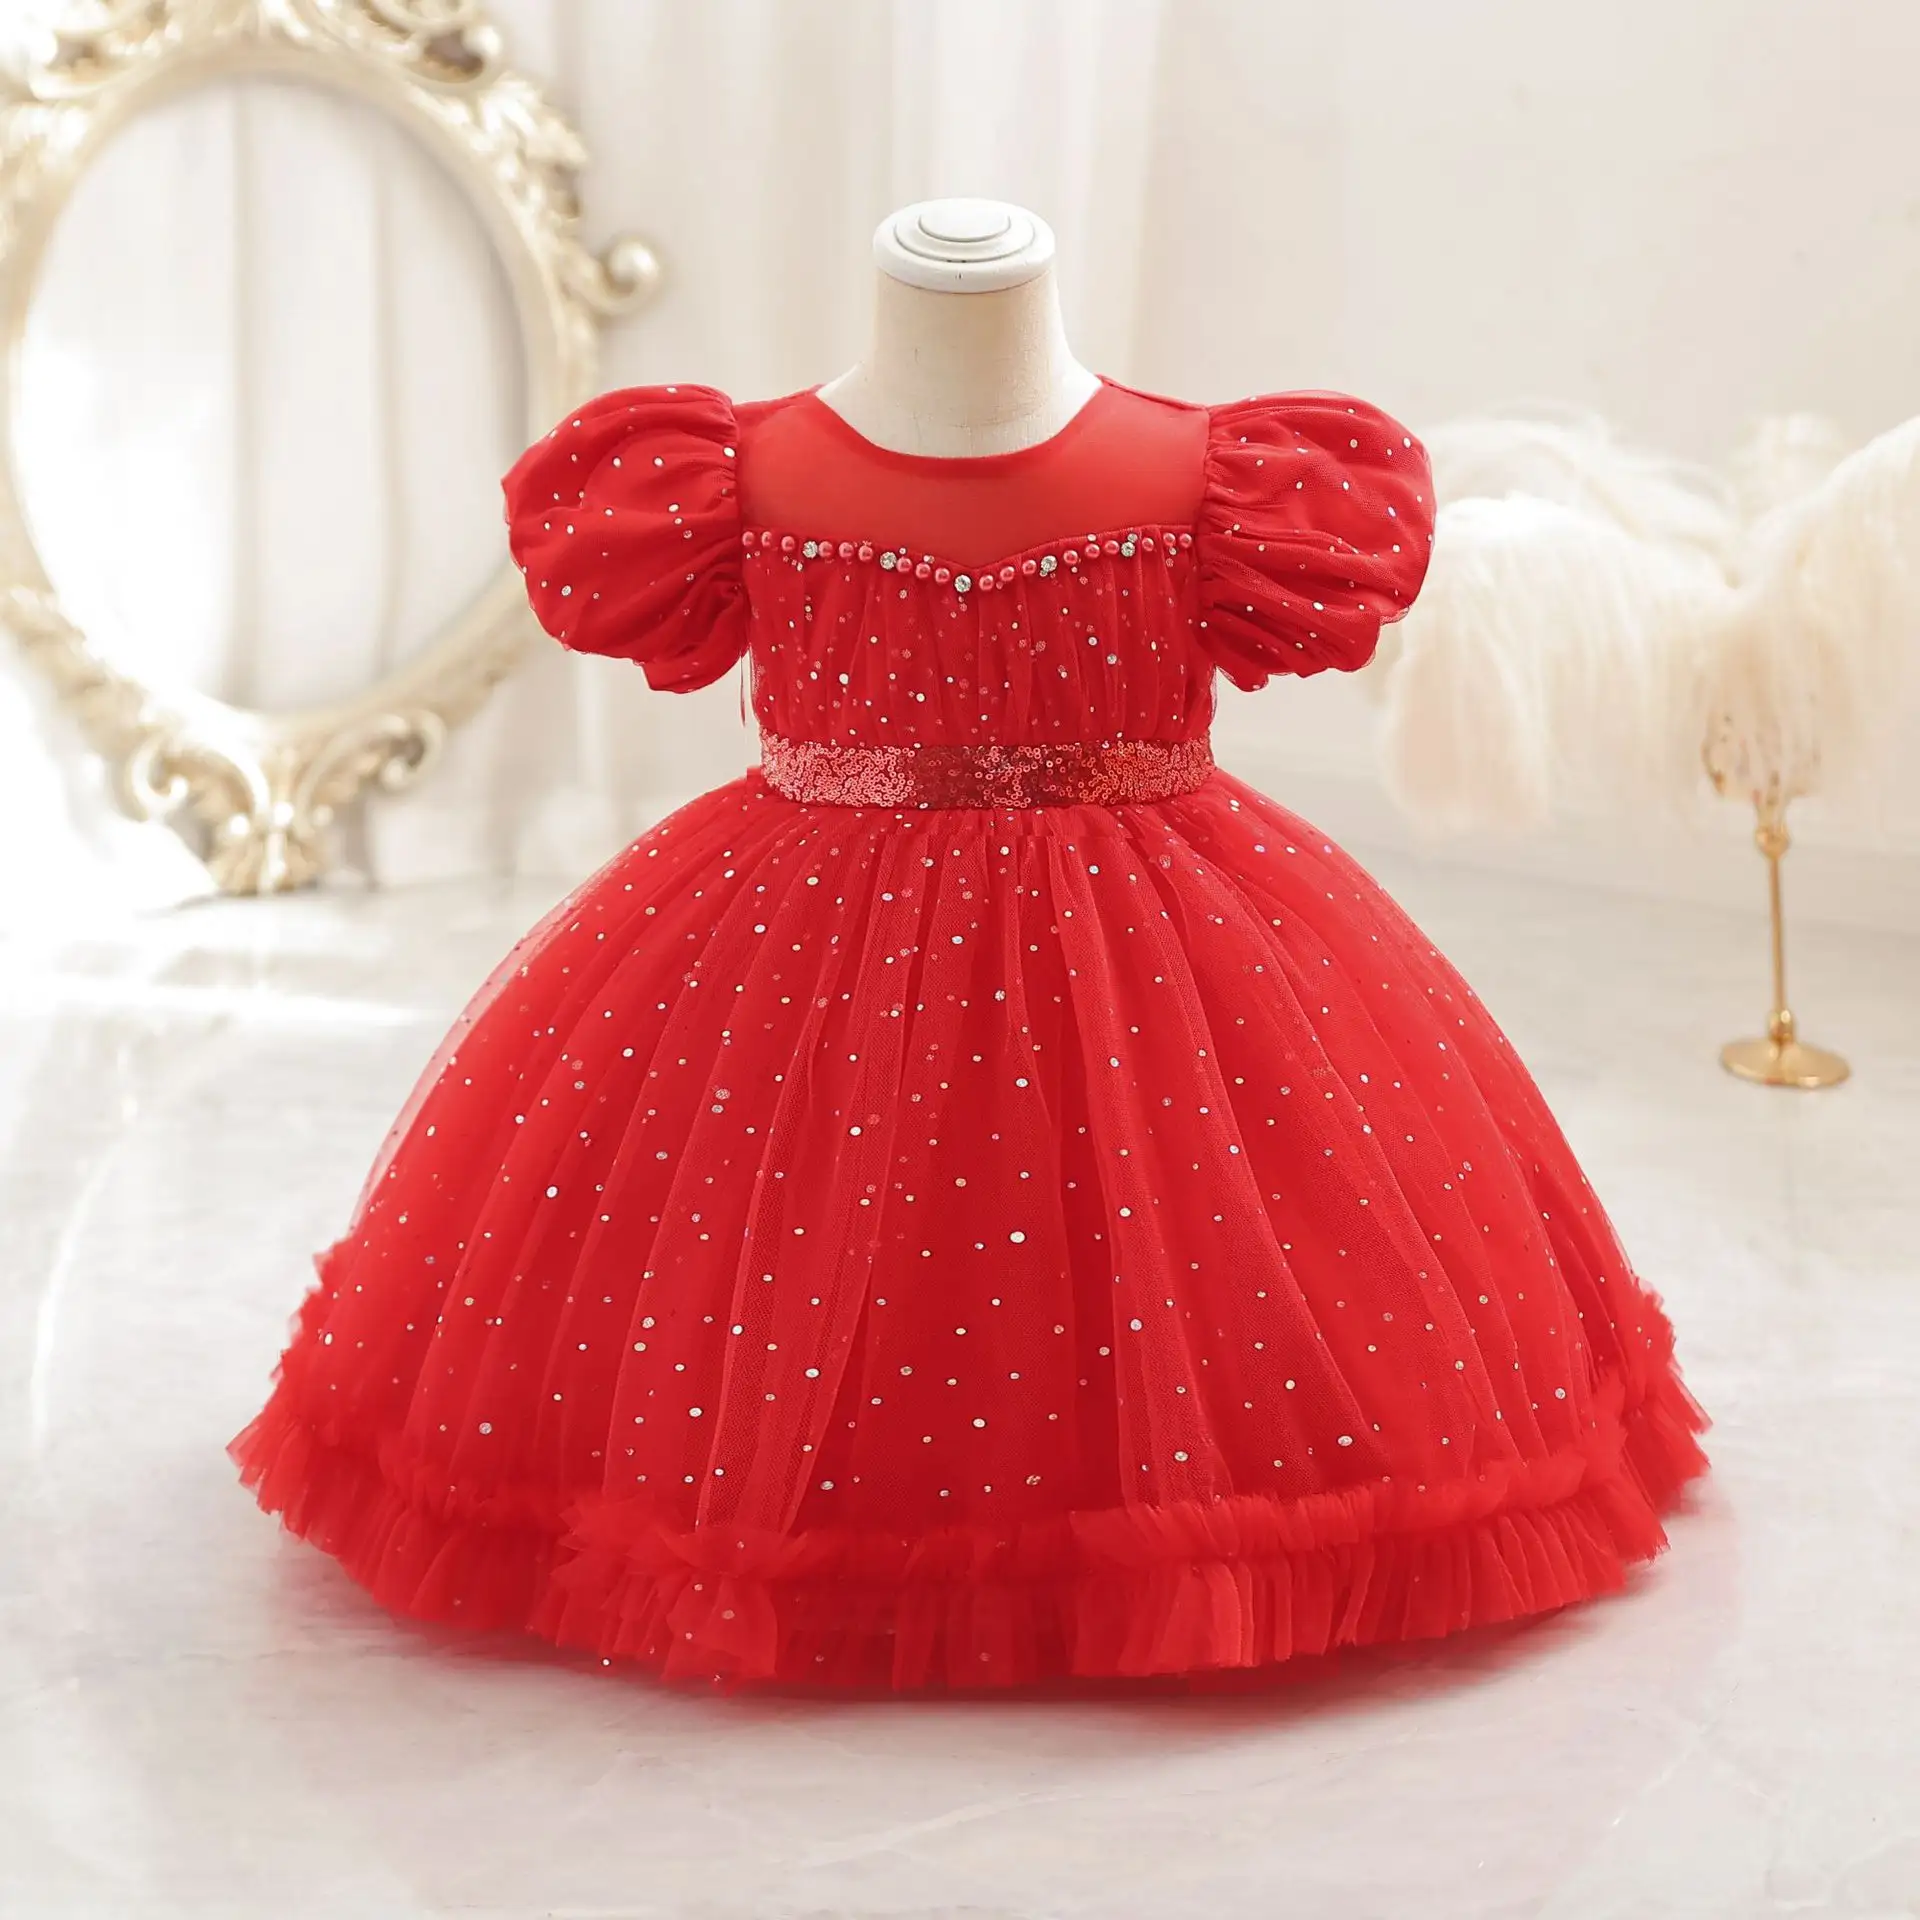 Pearl Princess Wedding Dress Wholesale Baby Kids Party Girl Dresses Clothes Parti Girl Dress